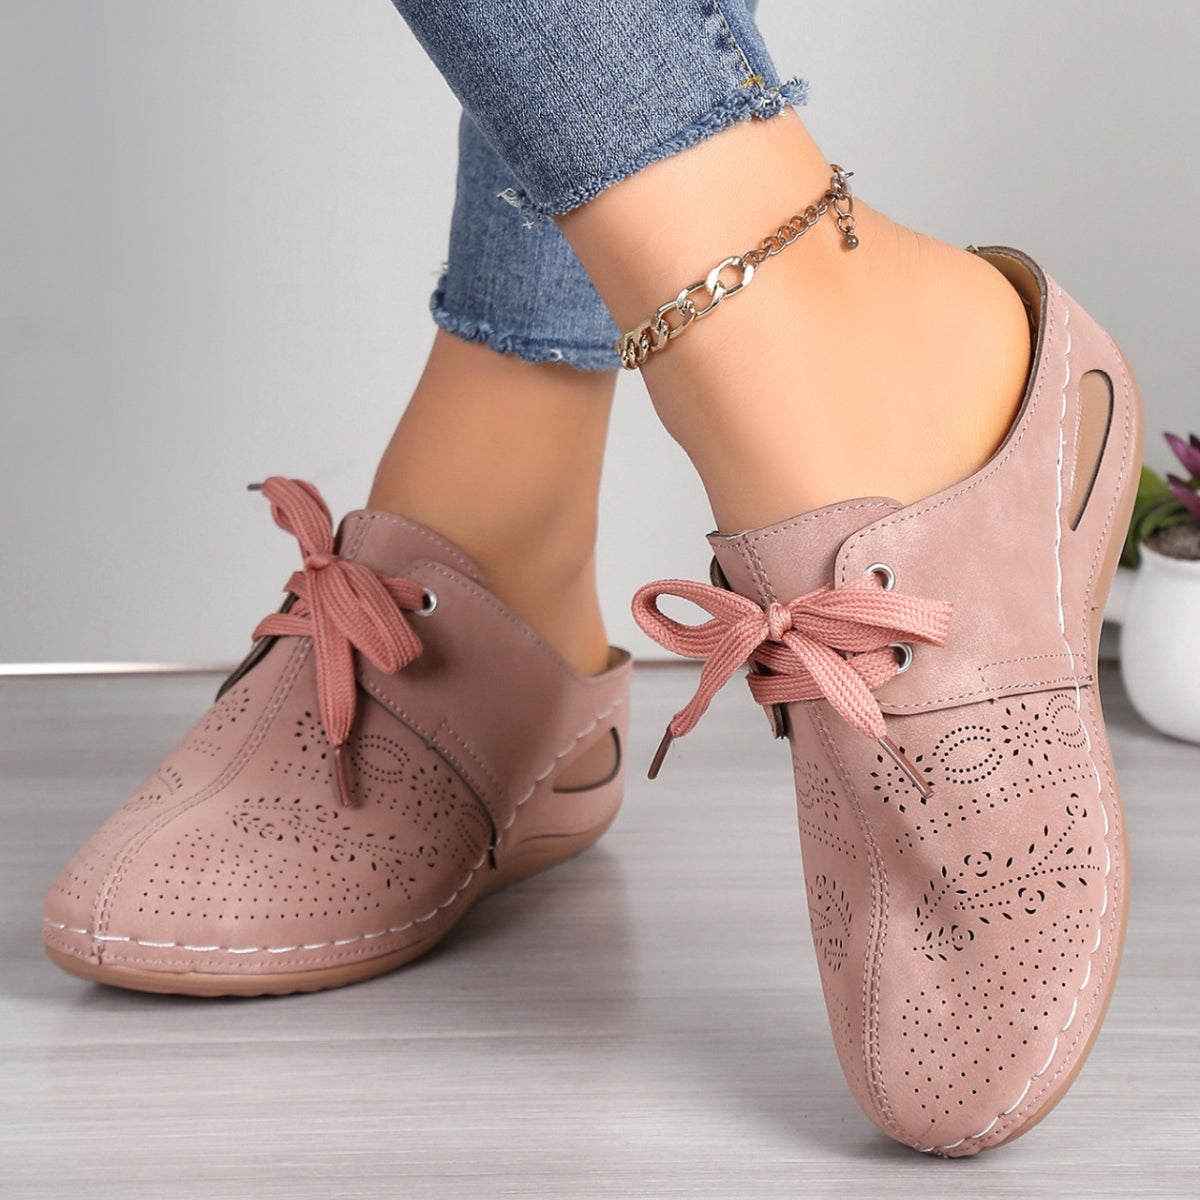 Lace-Up Round Toe Wedge Sandals